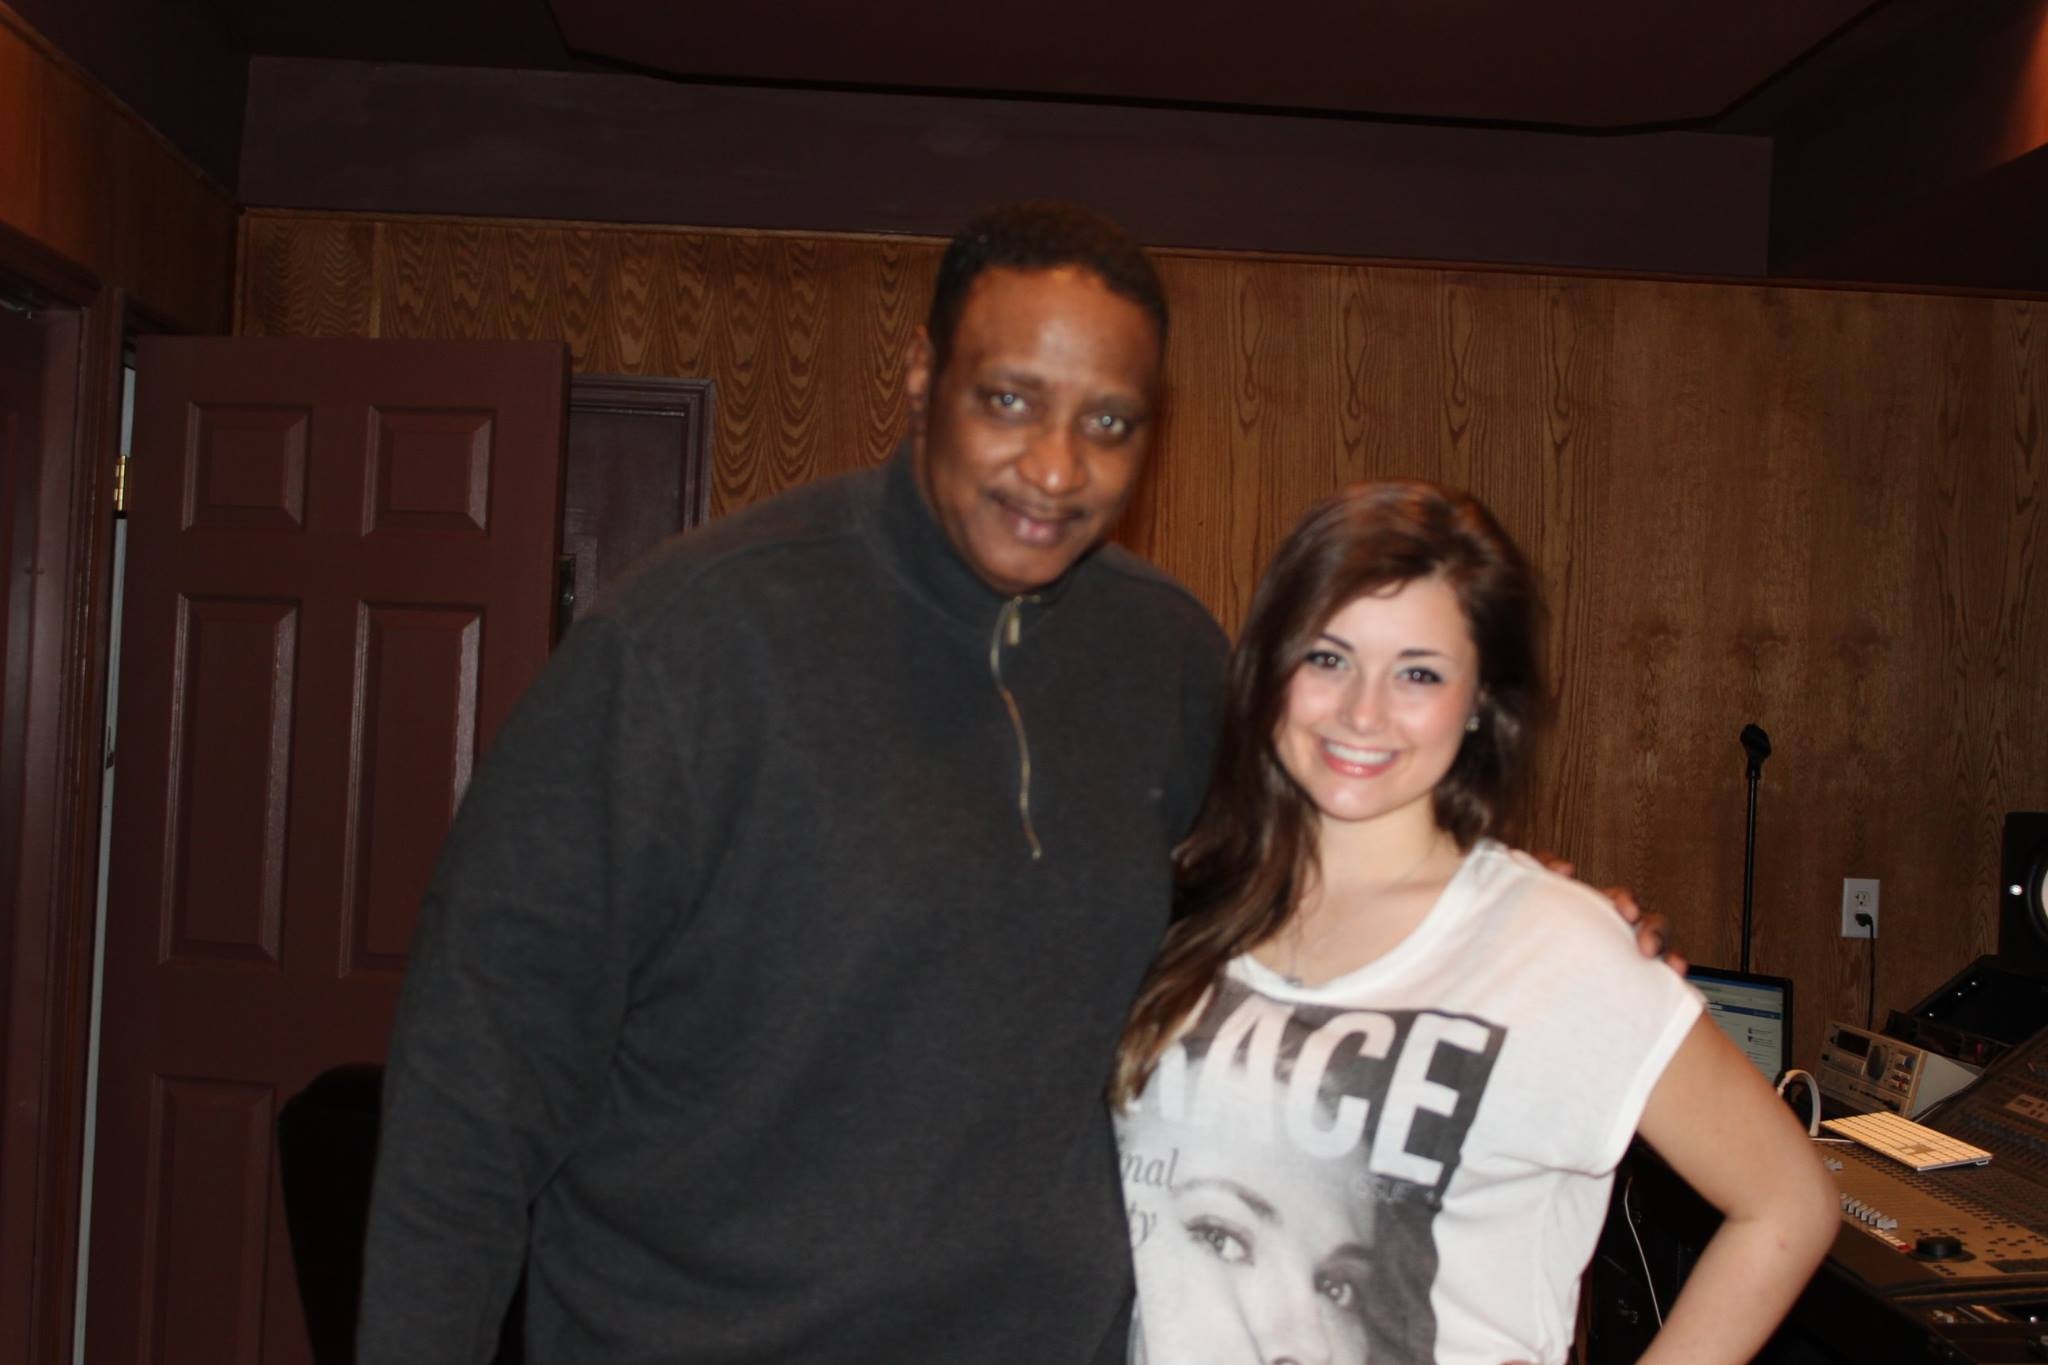 Maurice Starr and Briana Richel